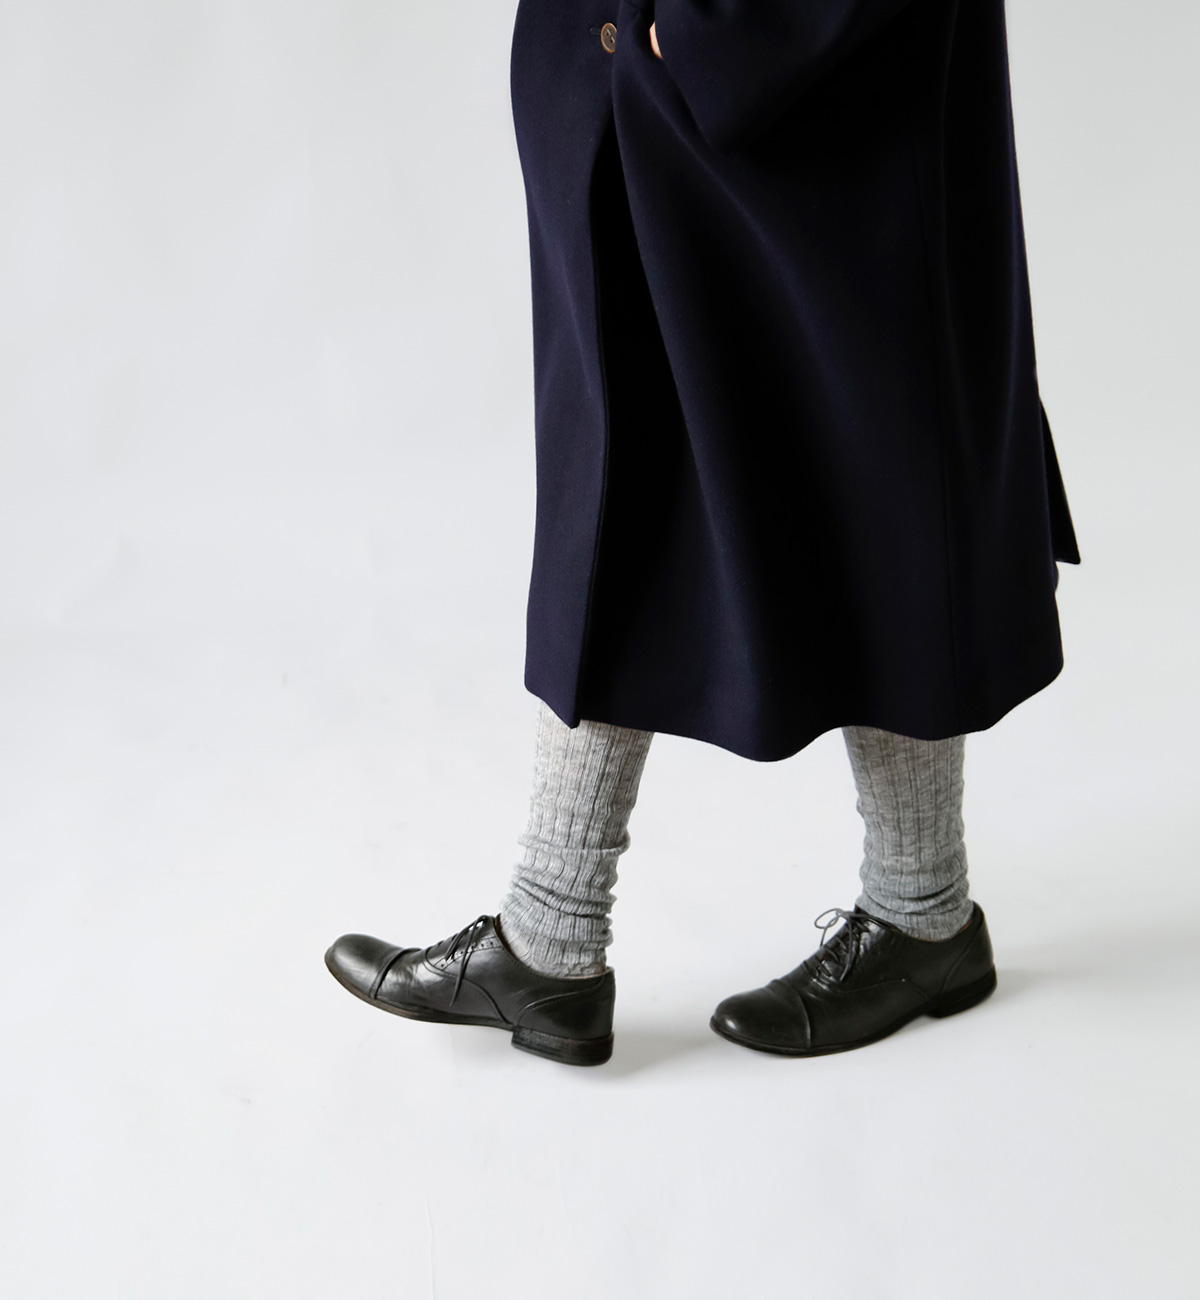 R & D.M.Co-(I[h}Ye[[)[YtBbg^Cc"LOOSE FIT TIGHTS" 3817